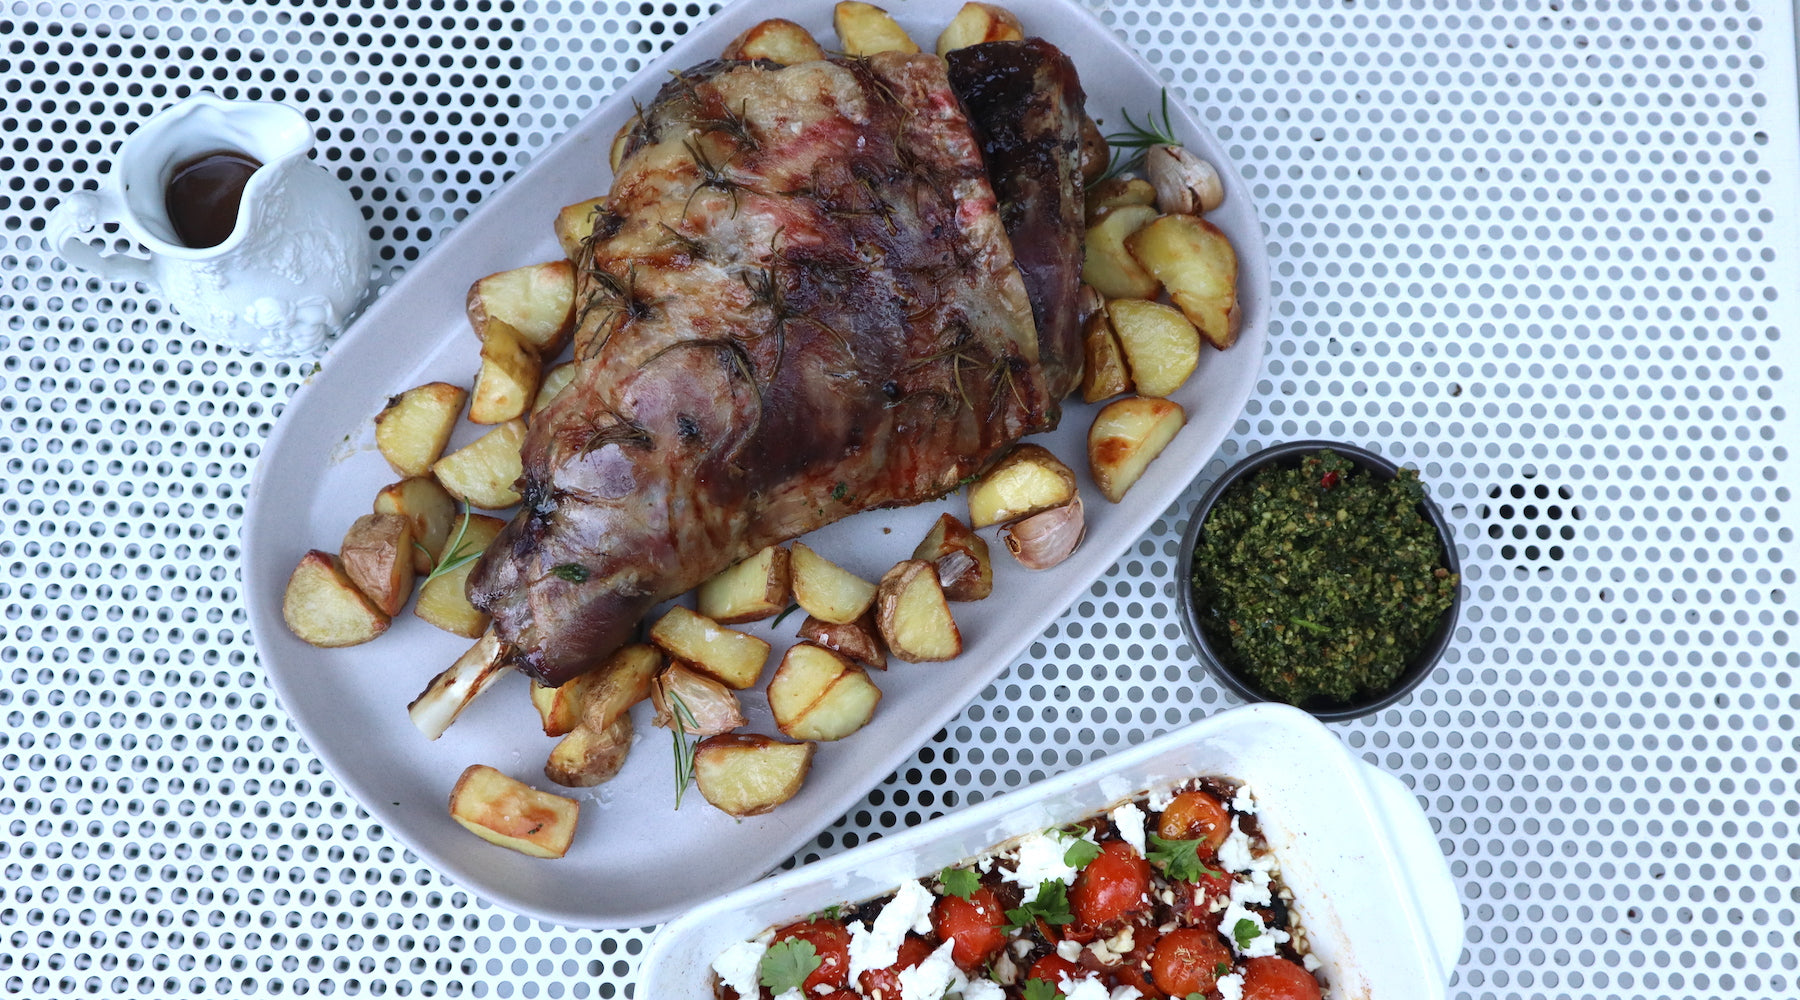 Festive Feasting - Whole Leg of Lamb with Anchovies, Capers and Rosemary